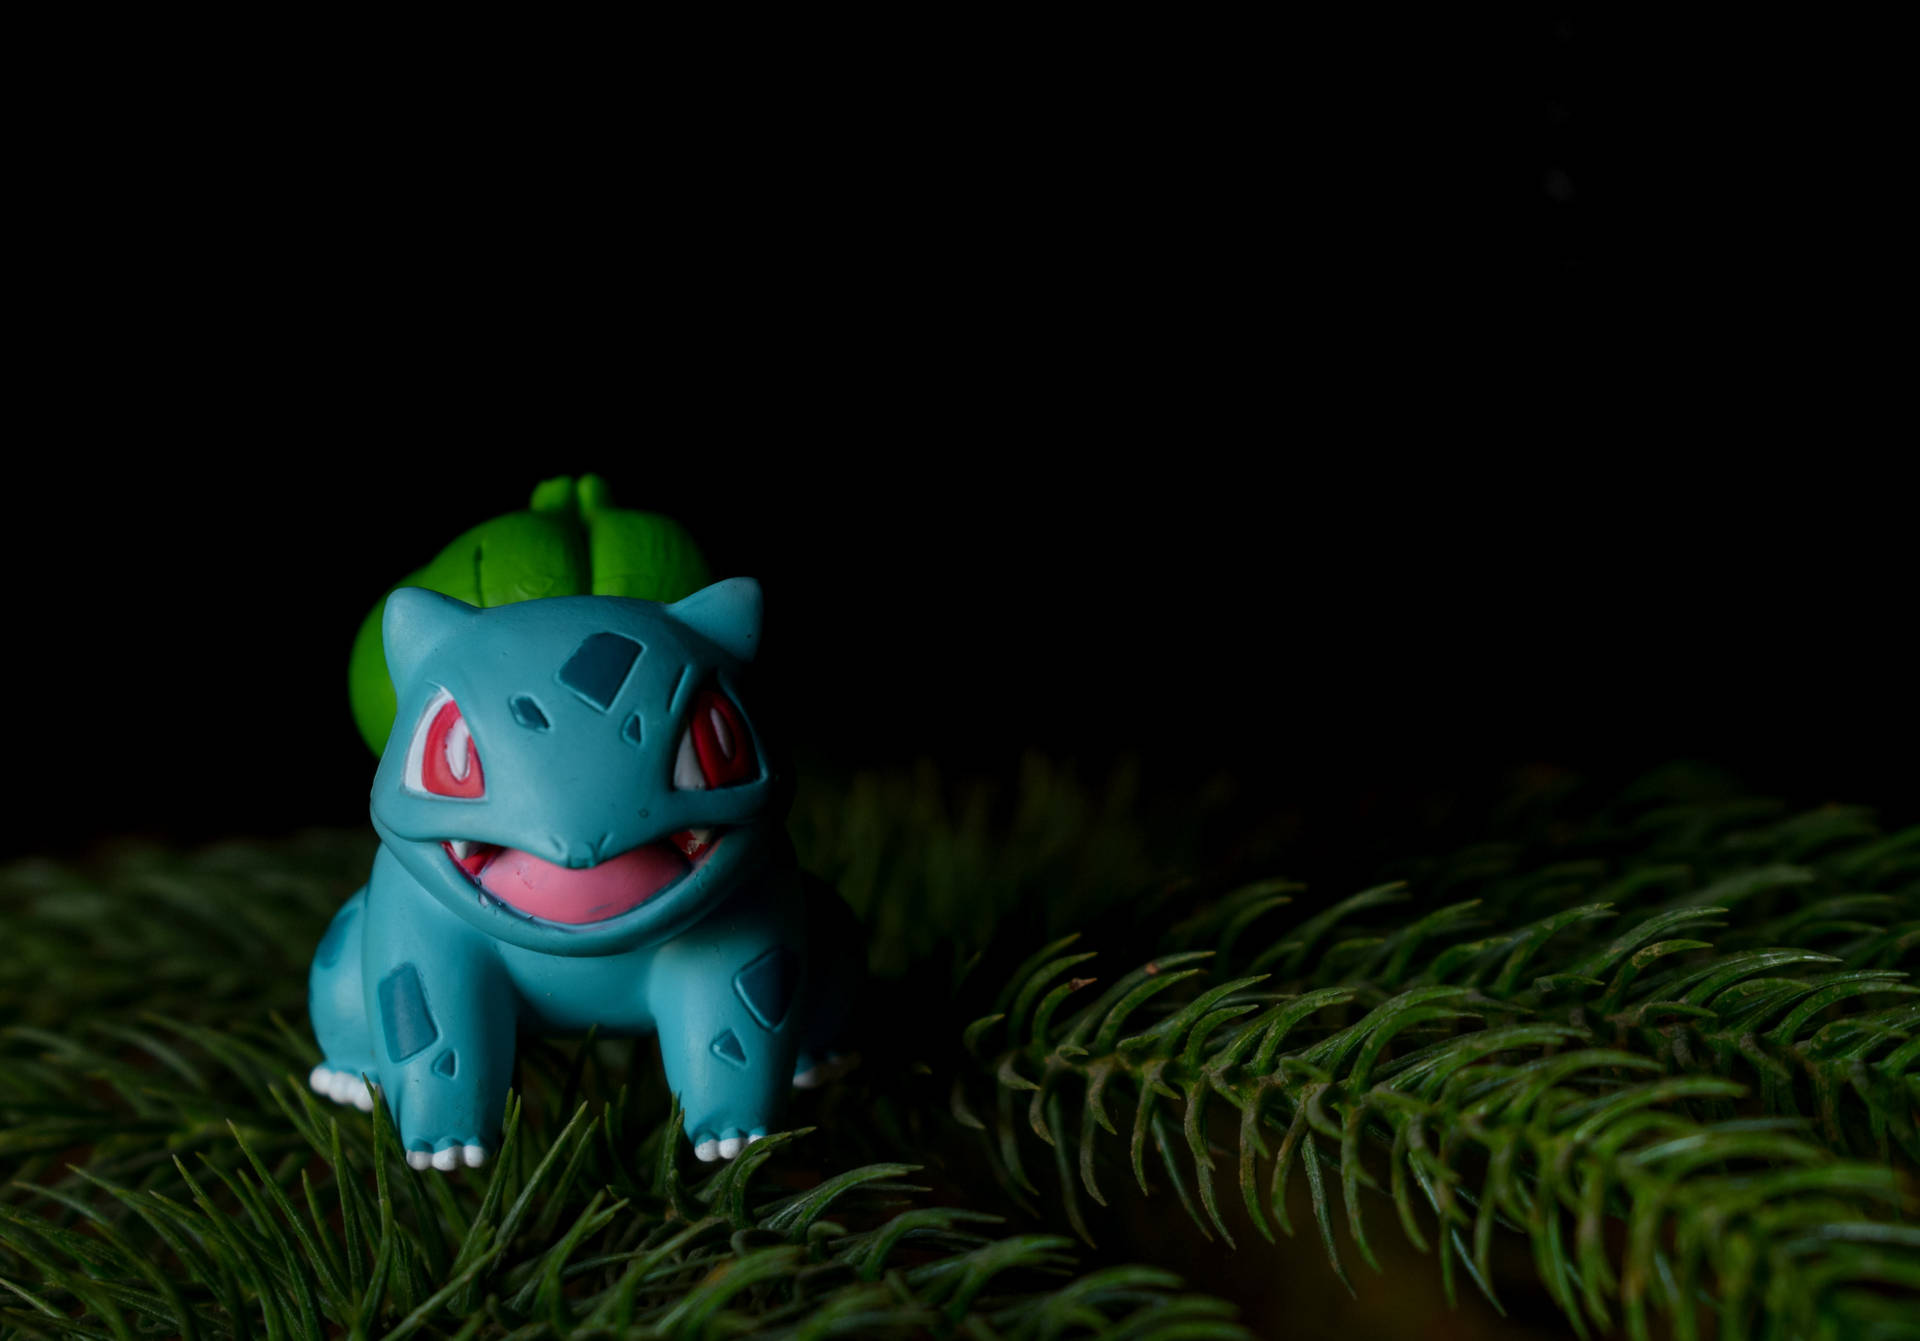 Bulbasaur 5258X3673 Wallpaper and Background Image